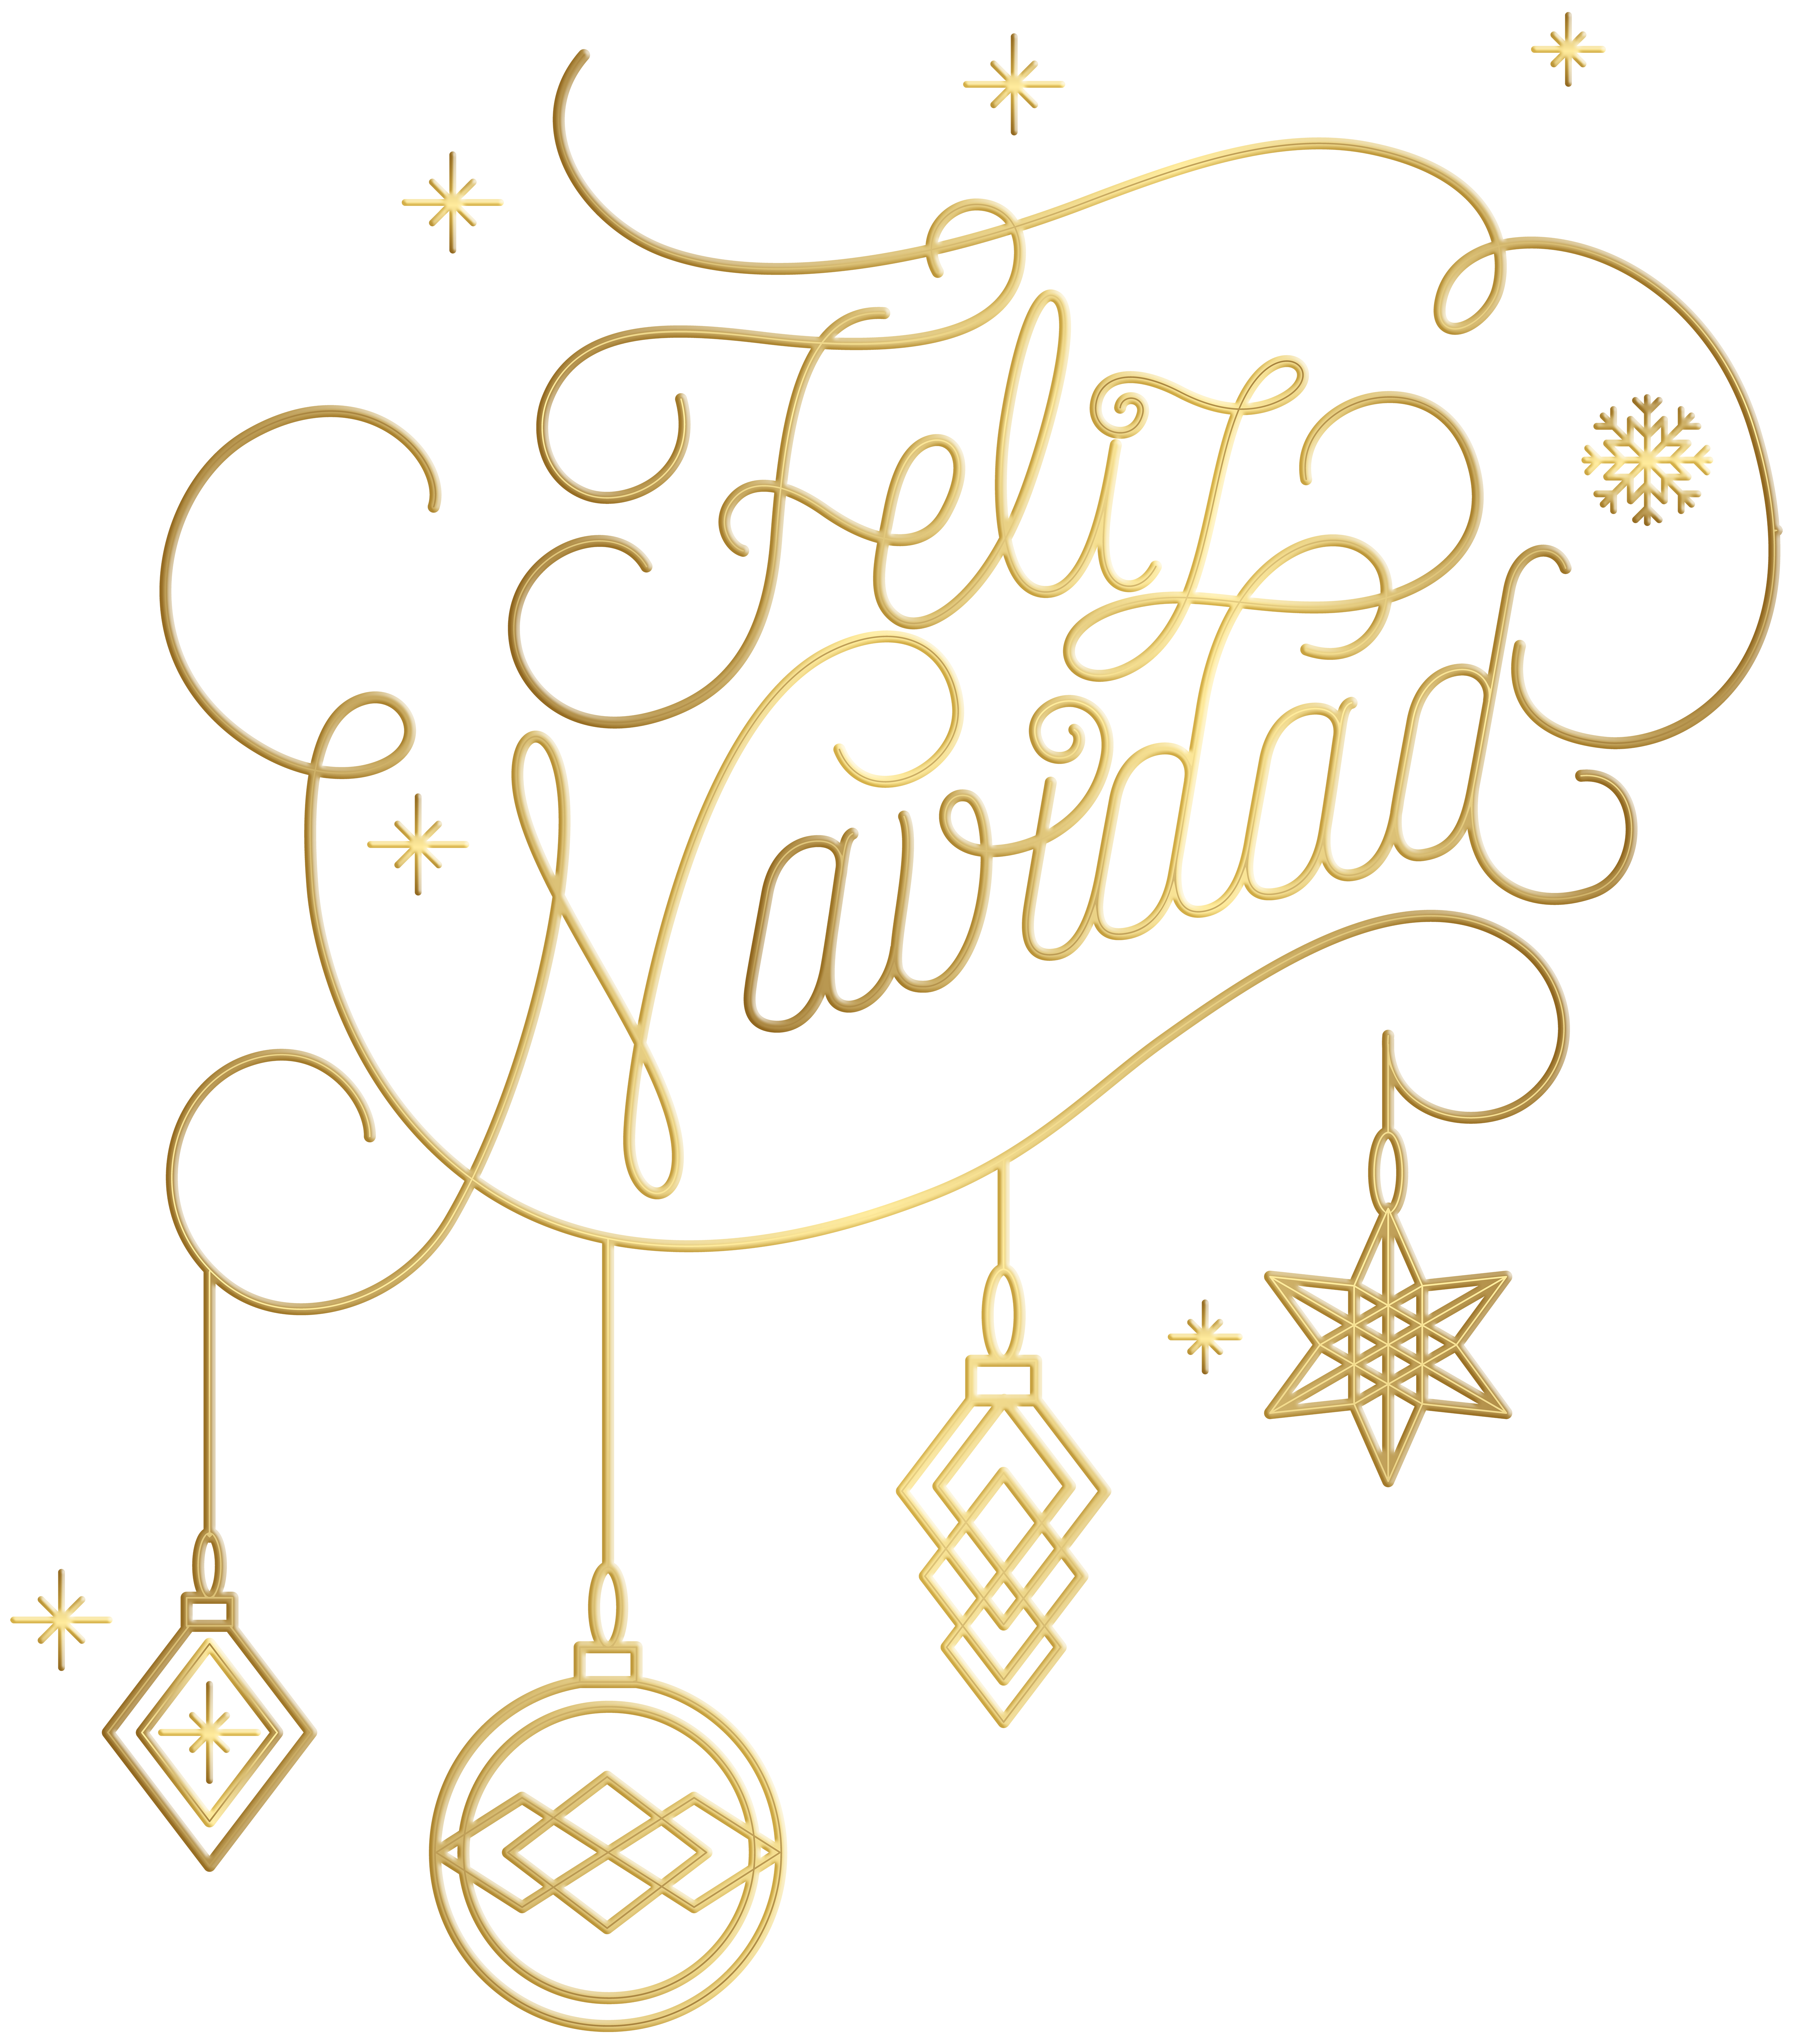 Feliz Navidad PNG Clip Art Image​ | Gallery Yopriceville - High-Quality  Free Images and Transparent PNG Clipart